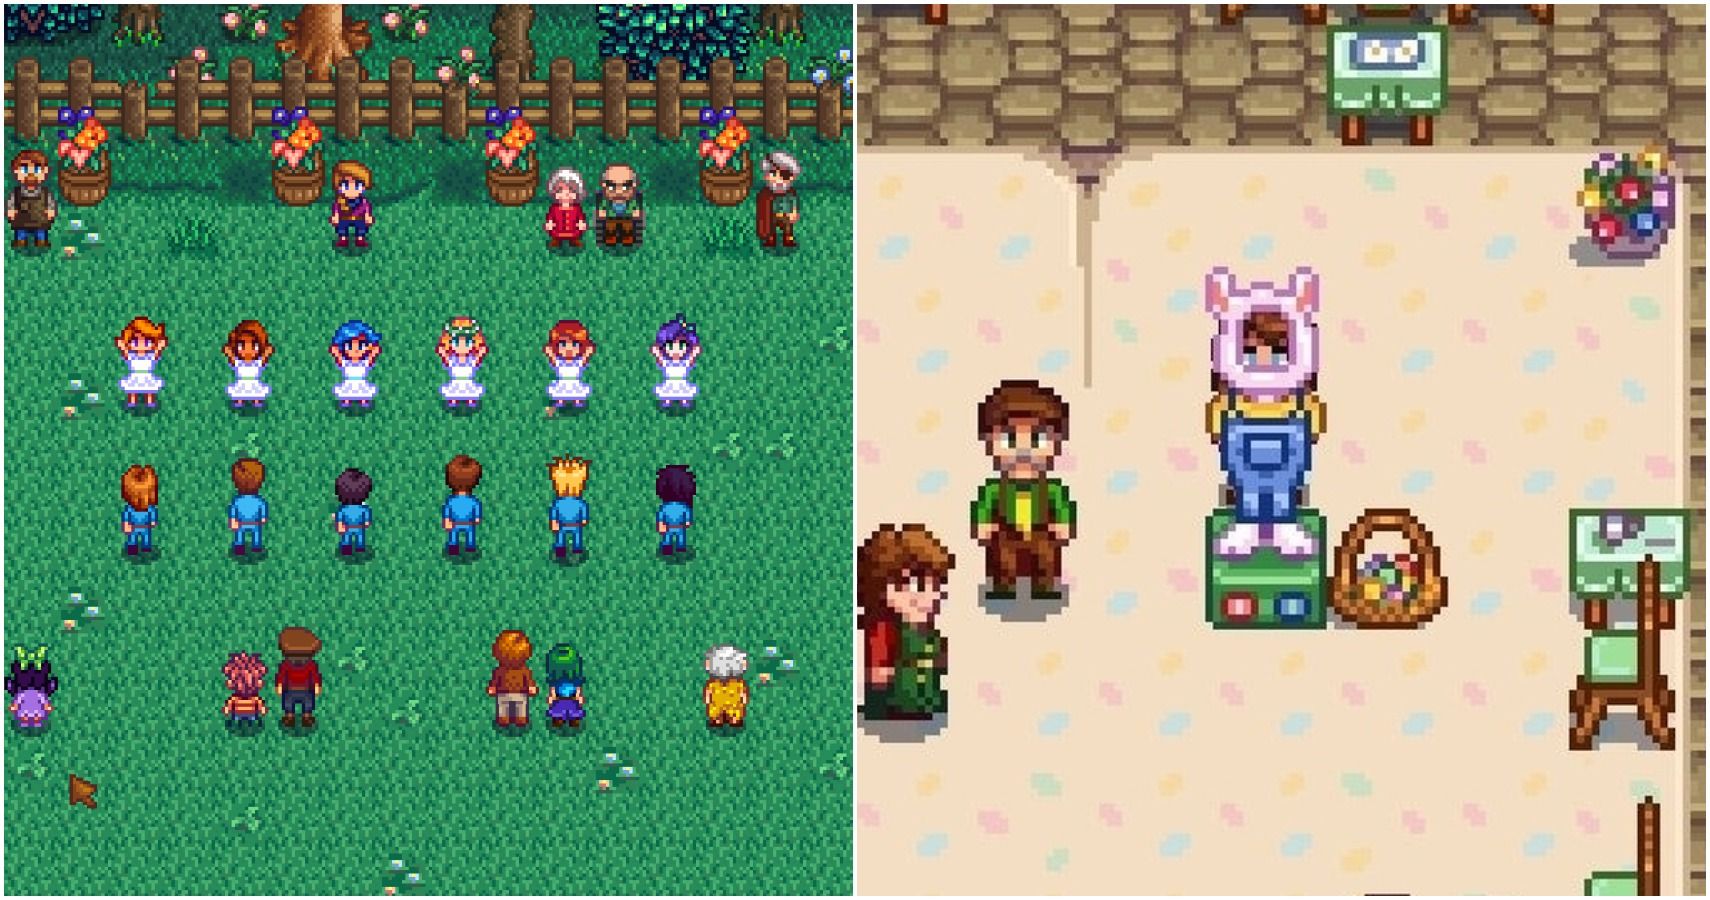 Stardew Valley: All of the Annual Events, Ranked